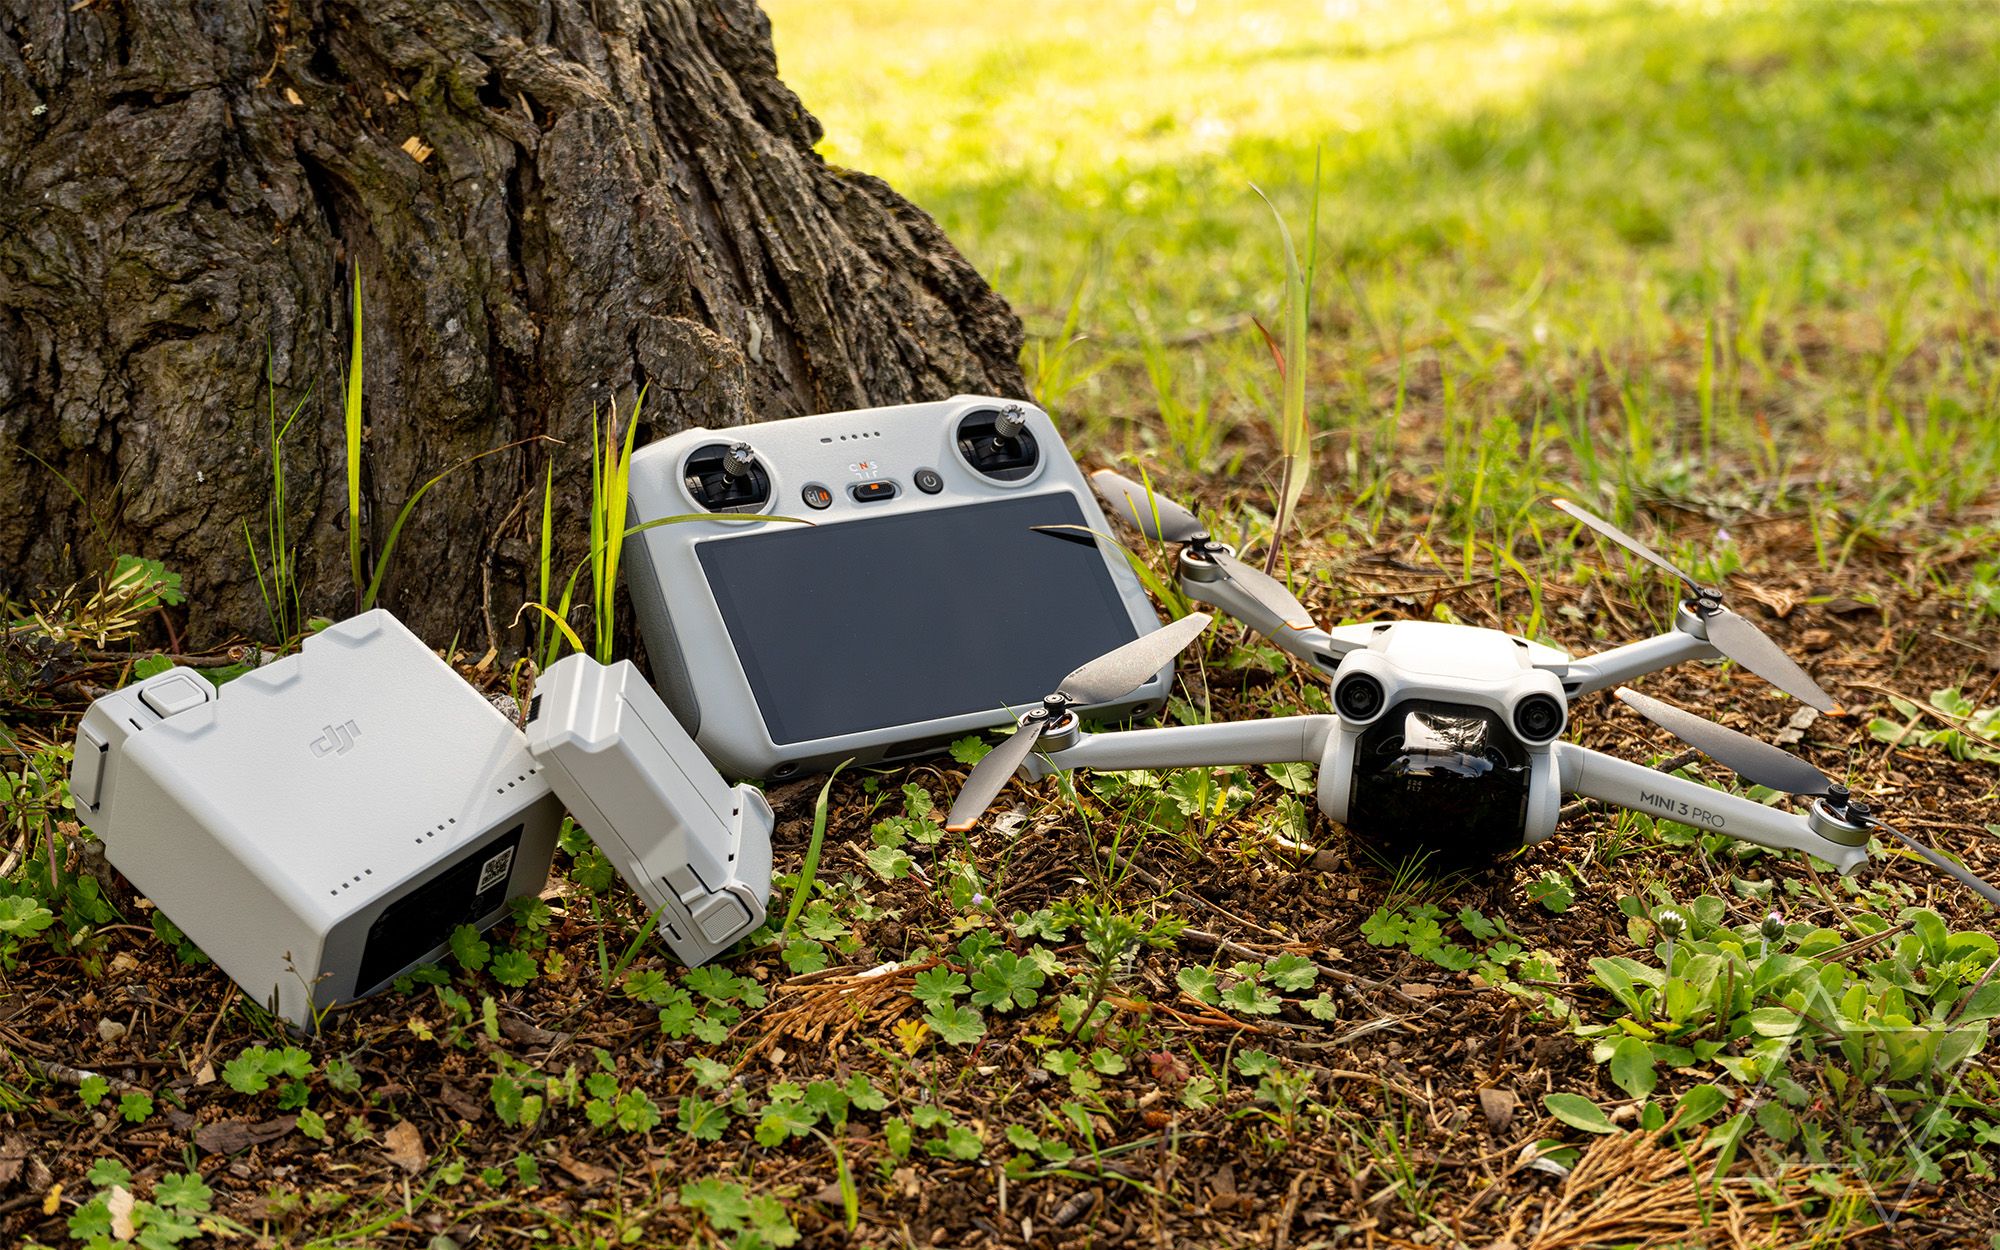 DJI Introduces its Entry-Level Mini 3 Drone